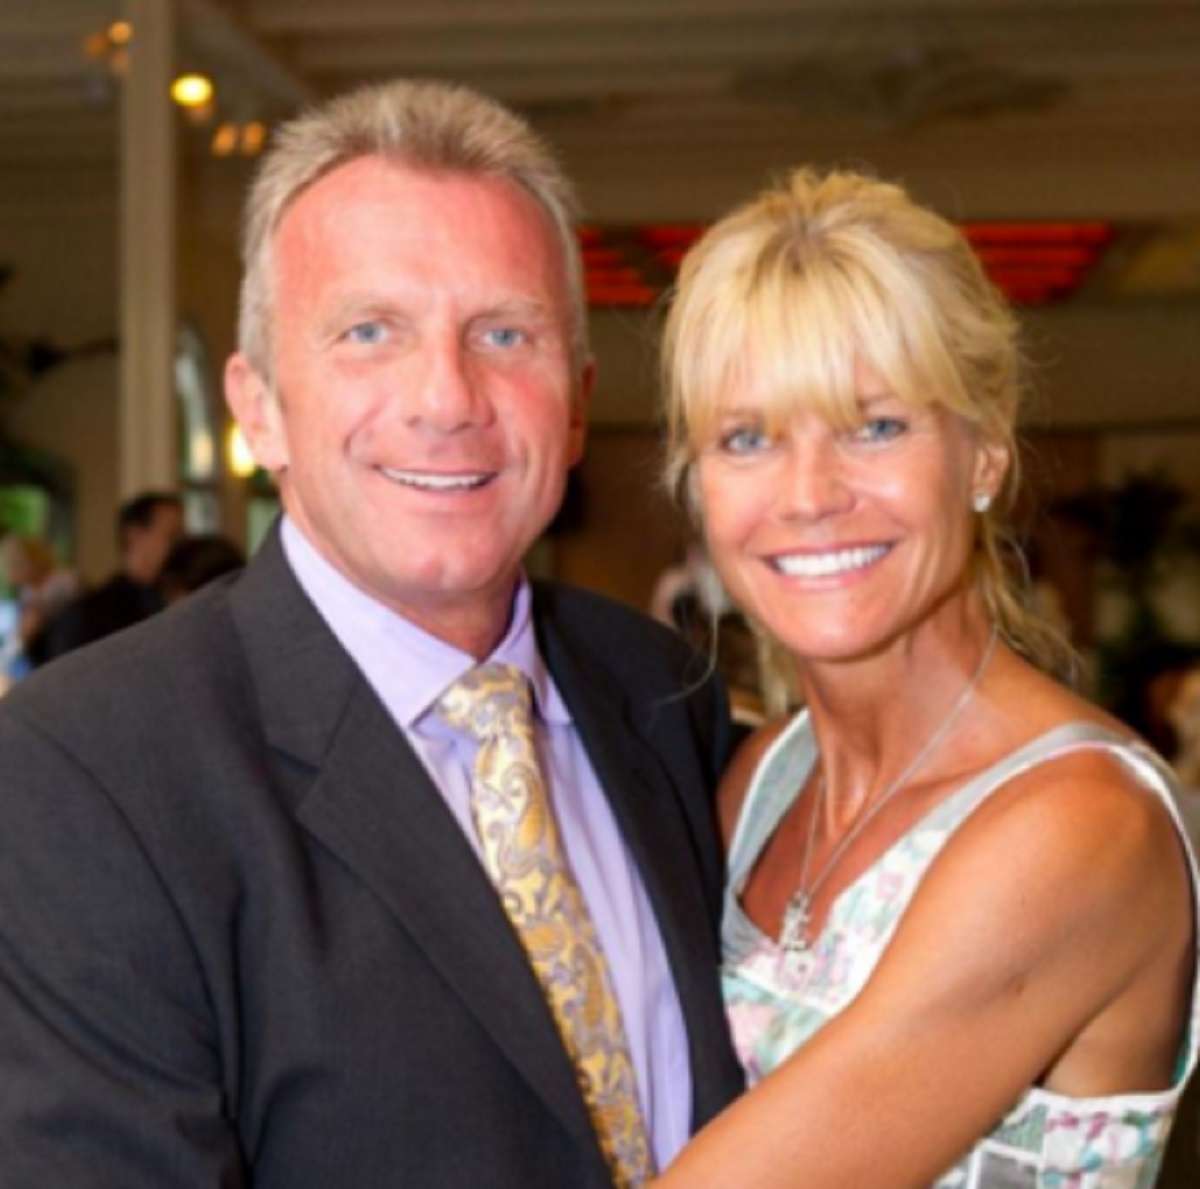 Joe Montana's Wife Fights Woman Trying To Kidnap Their Grandchild From Their Malibu Home